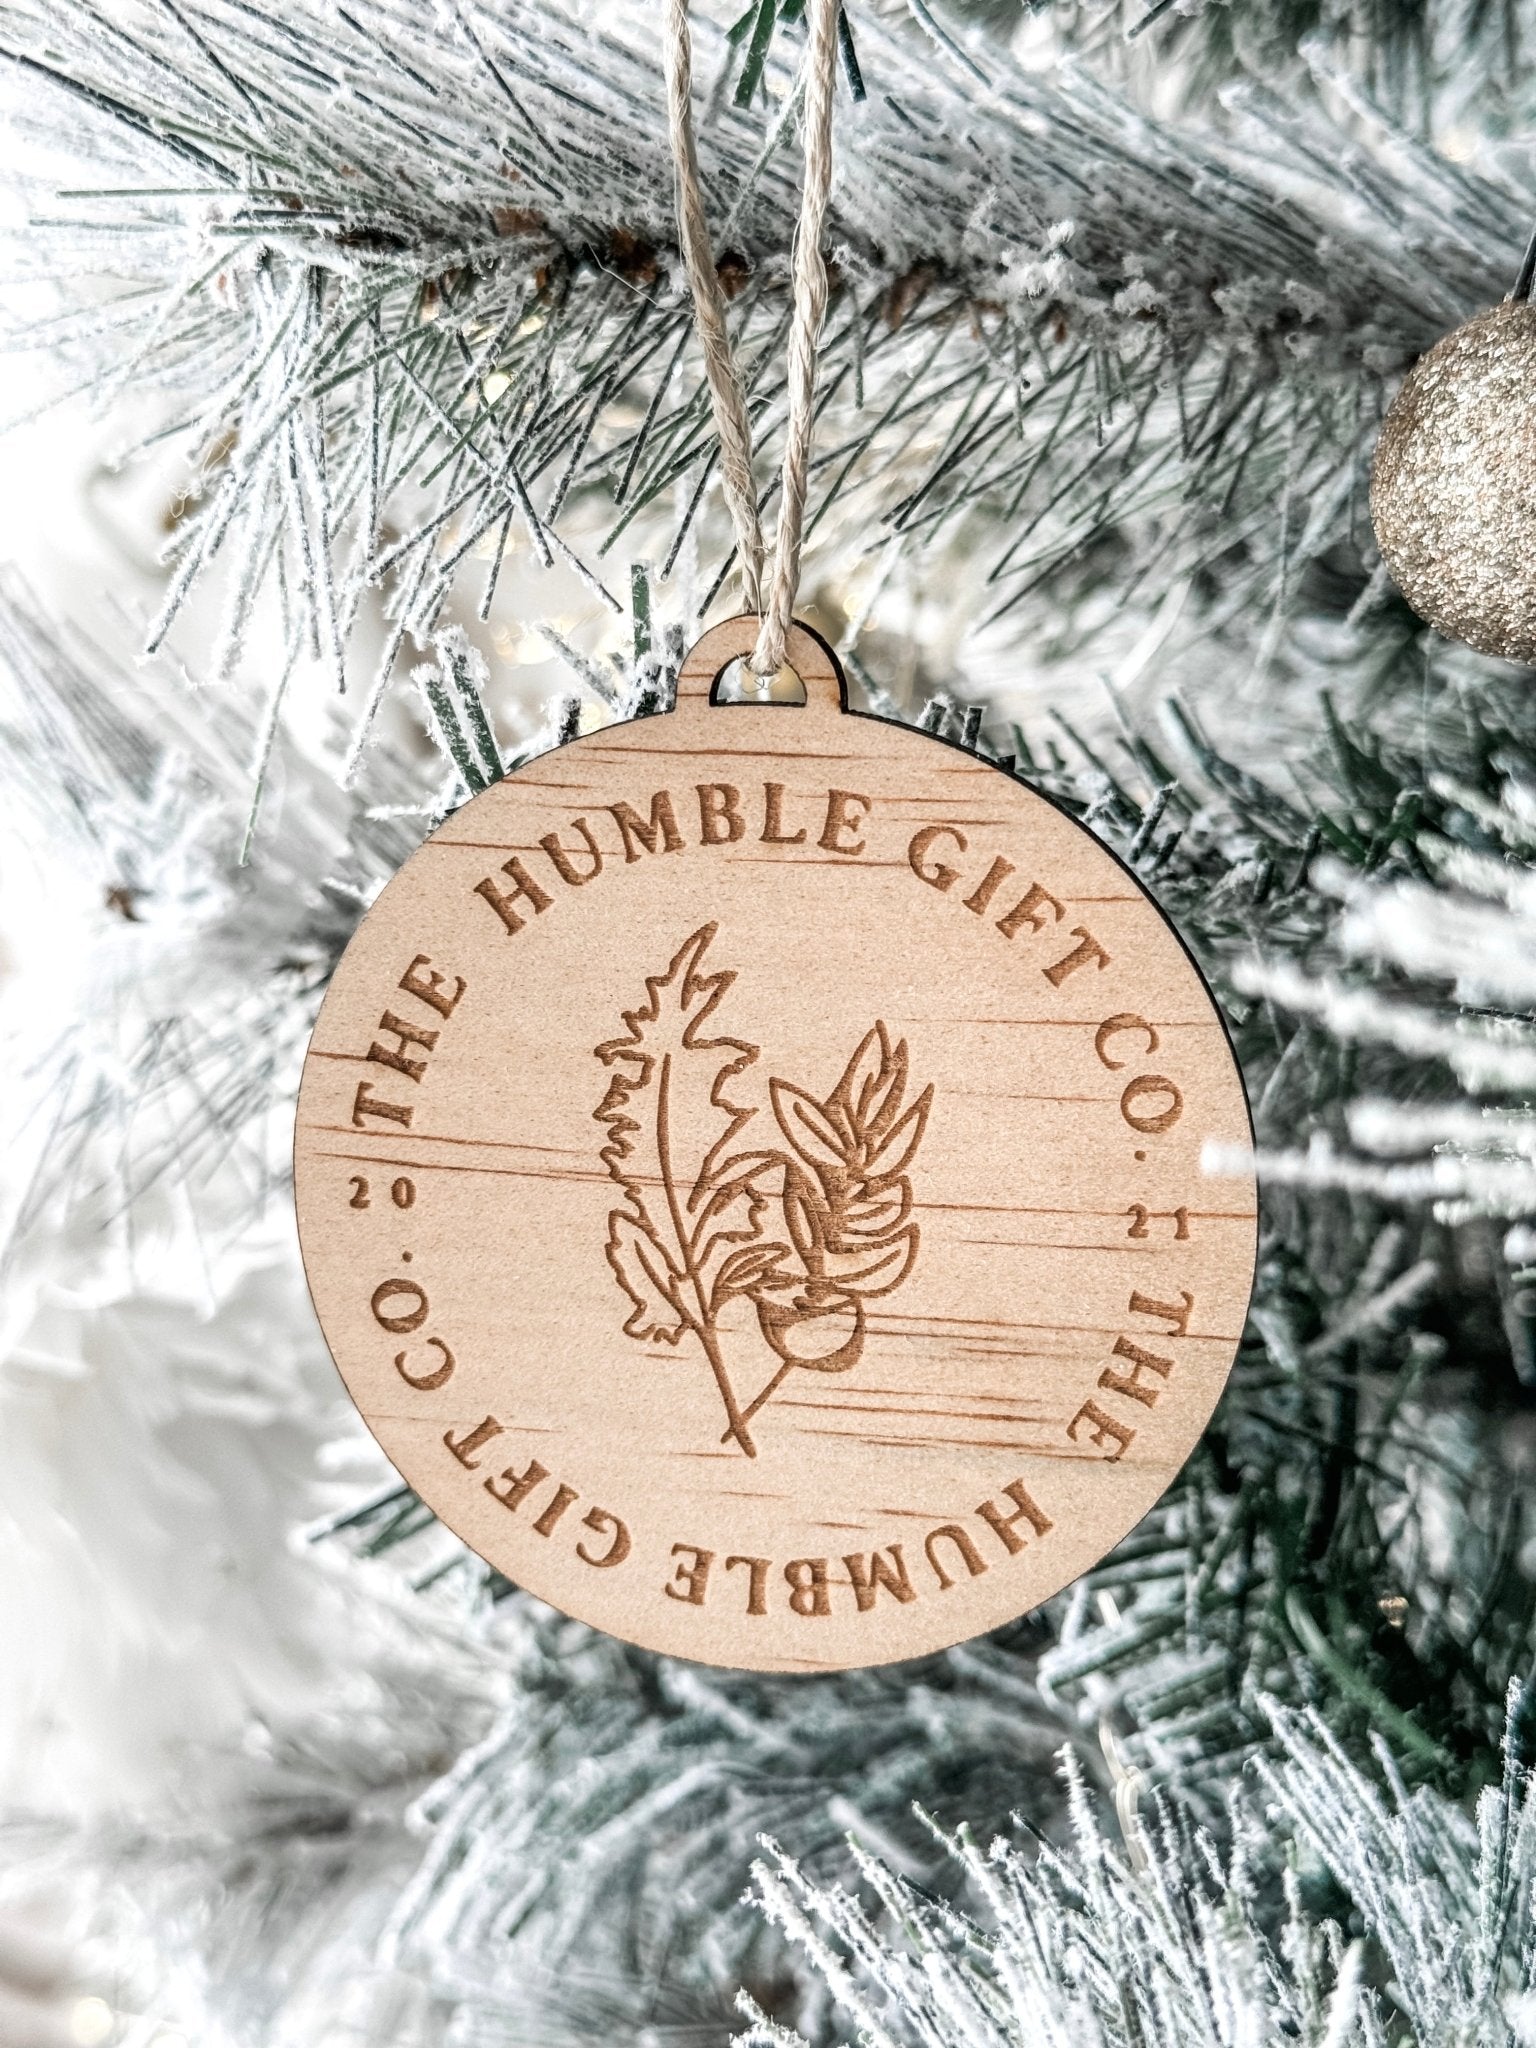 Business Logo Tree Ornament - The Humble Gift Co.